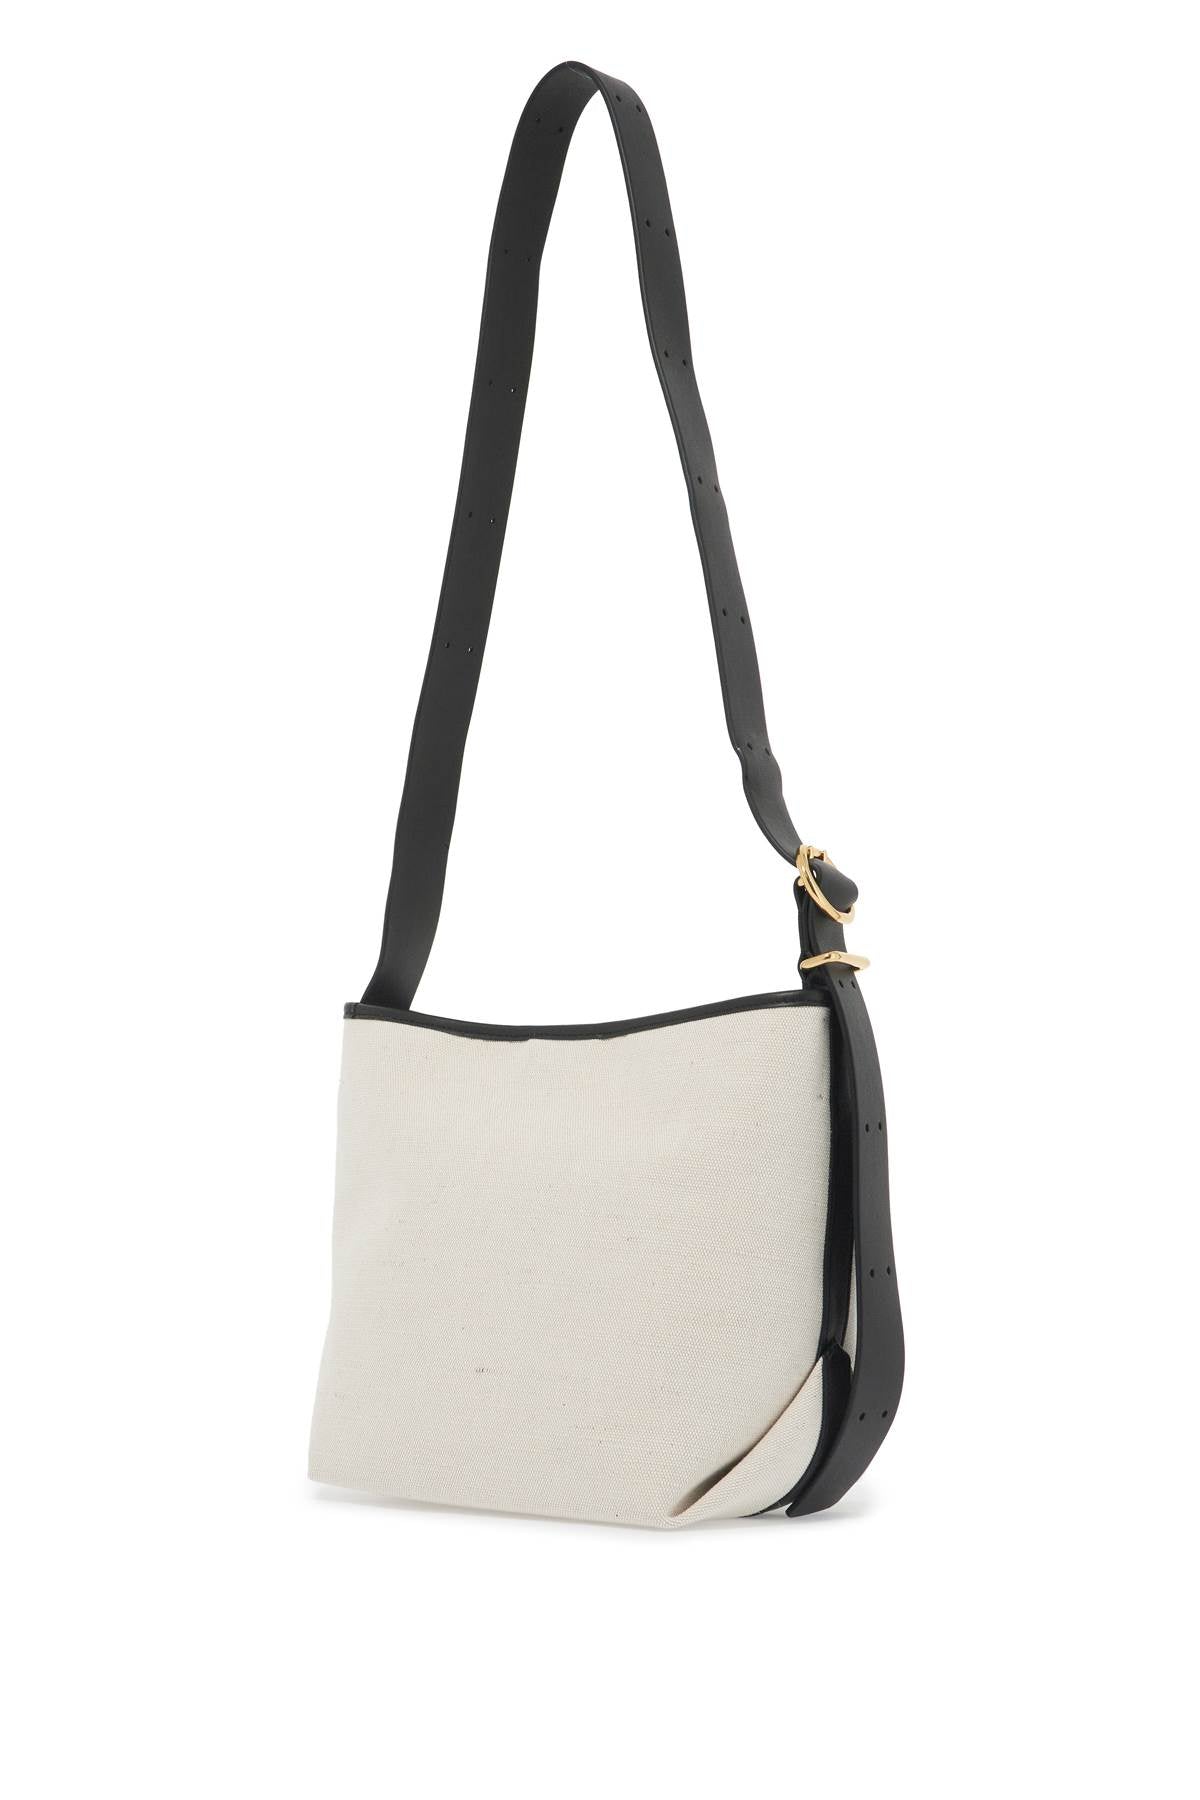 JIL SANDER Small Folded Black Canvas & Leather Tote with Gold Accents and Adjustable Strap